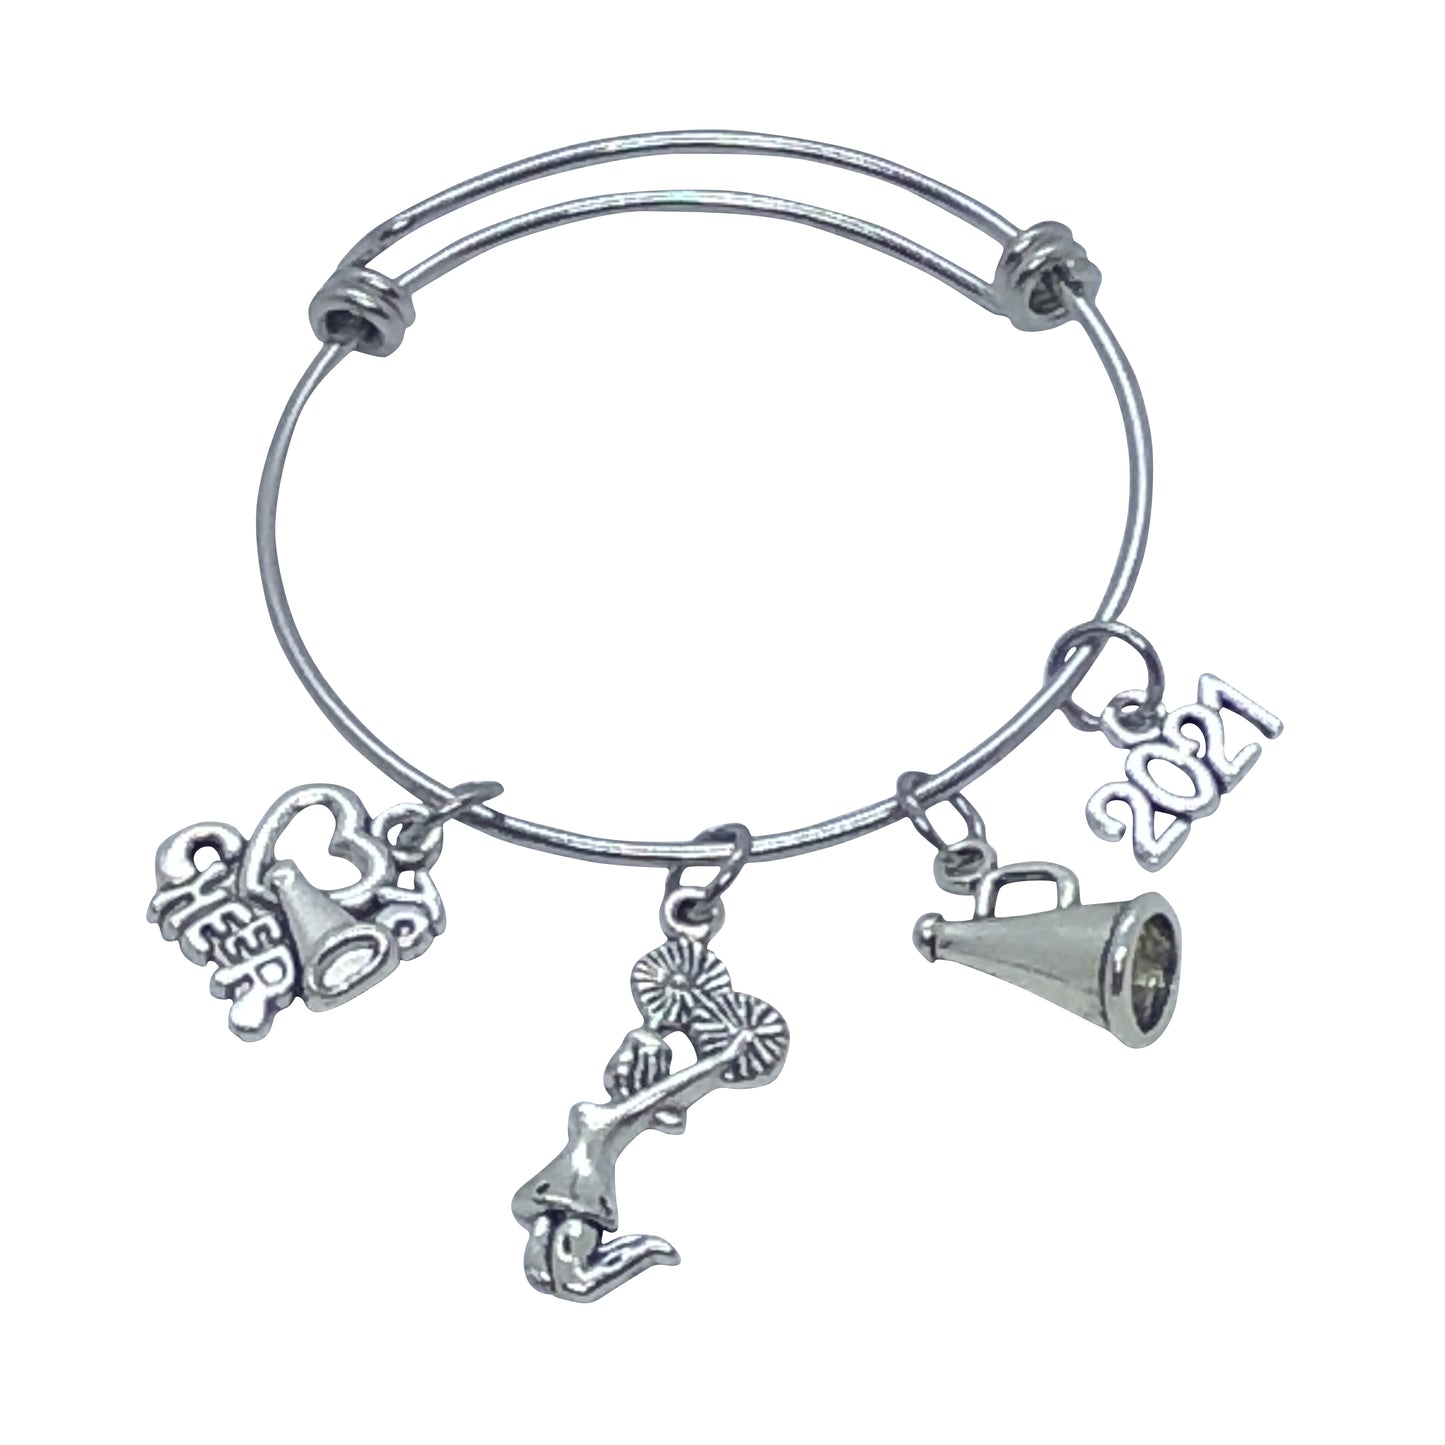 Adjustable Charm Bangle Bracelet Sterling Silver with 4 Free Sterling  Silver Jump Rings